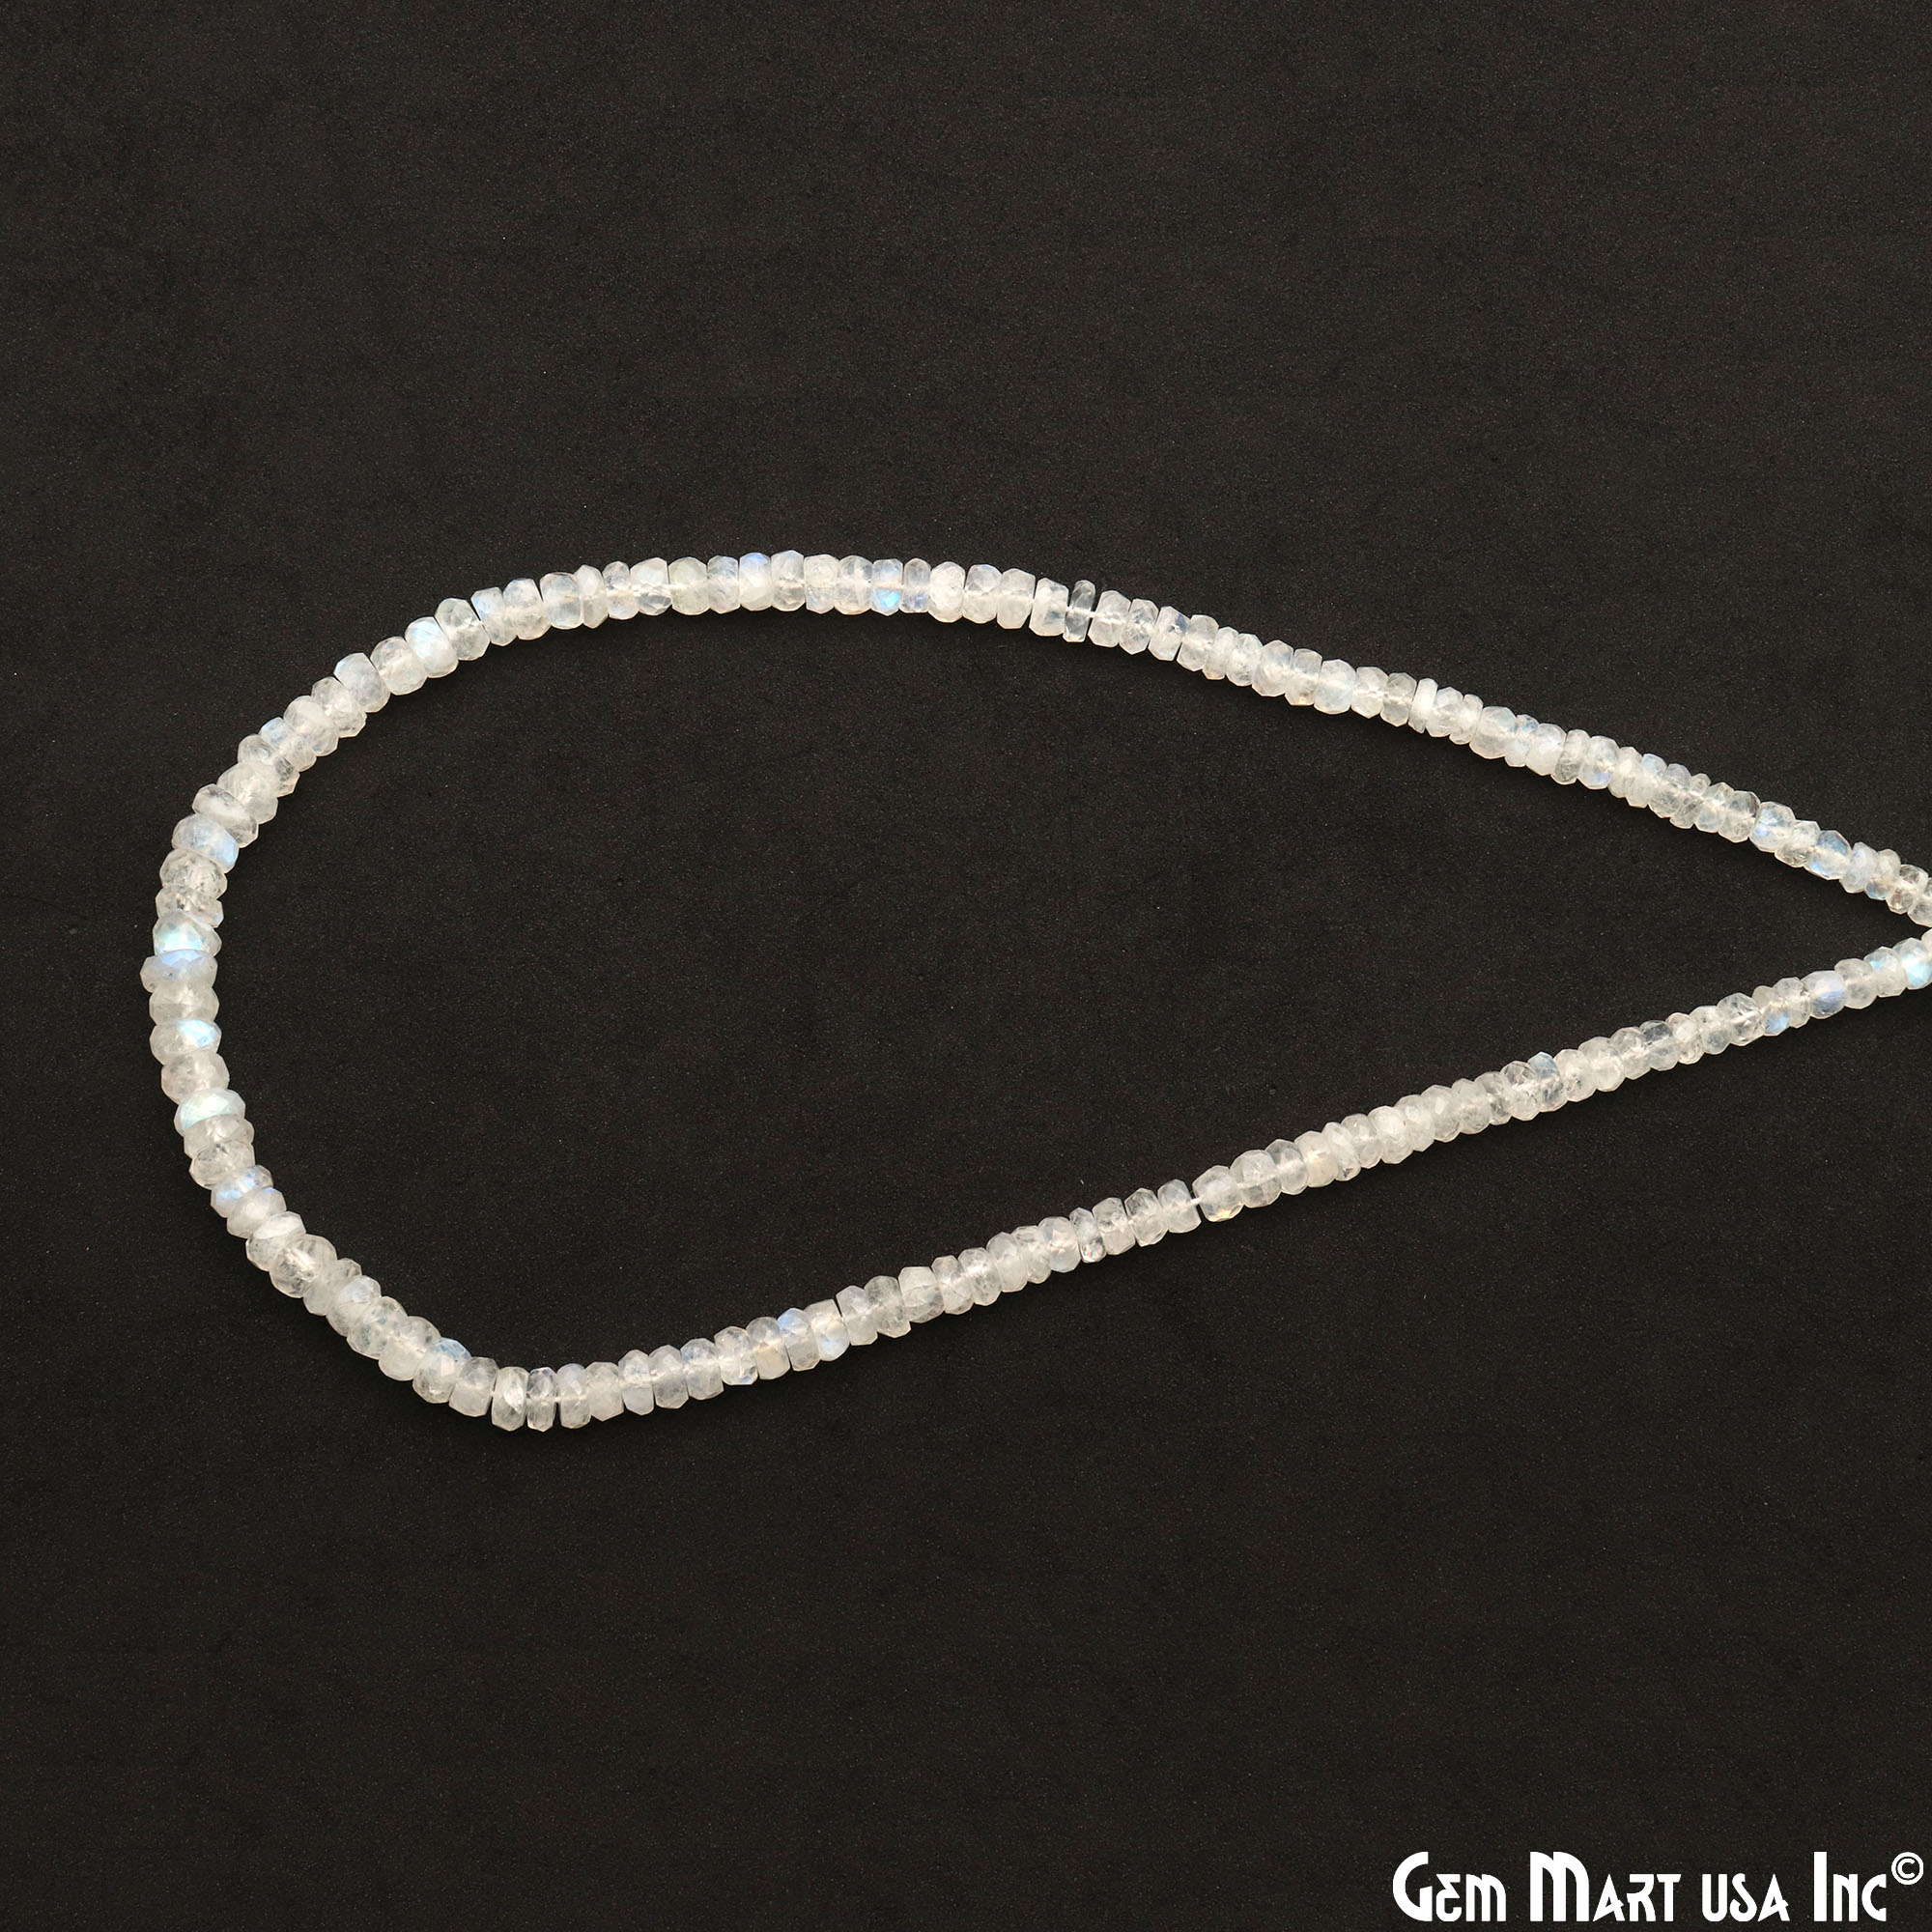 Rainbow Moonstone Micro Faceted Rondelle 3-4mm 13Inch Length AAAmazing Blue Luster (RLRM-70002) (762732445743)